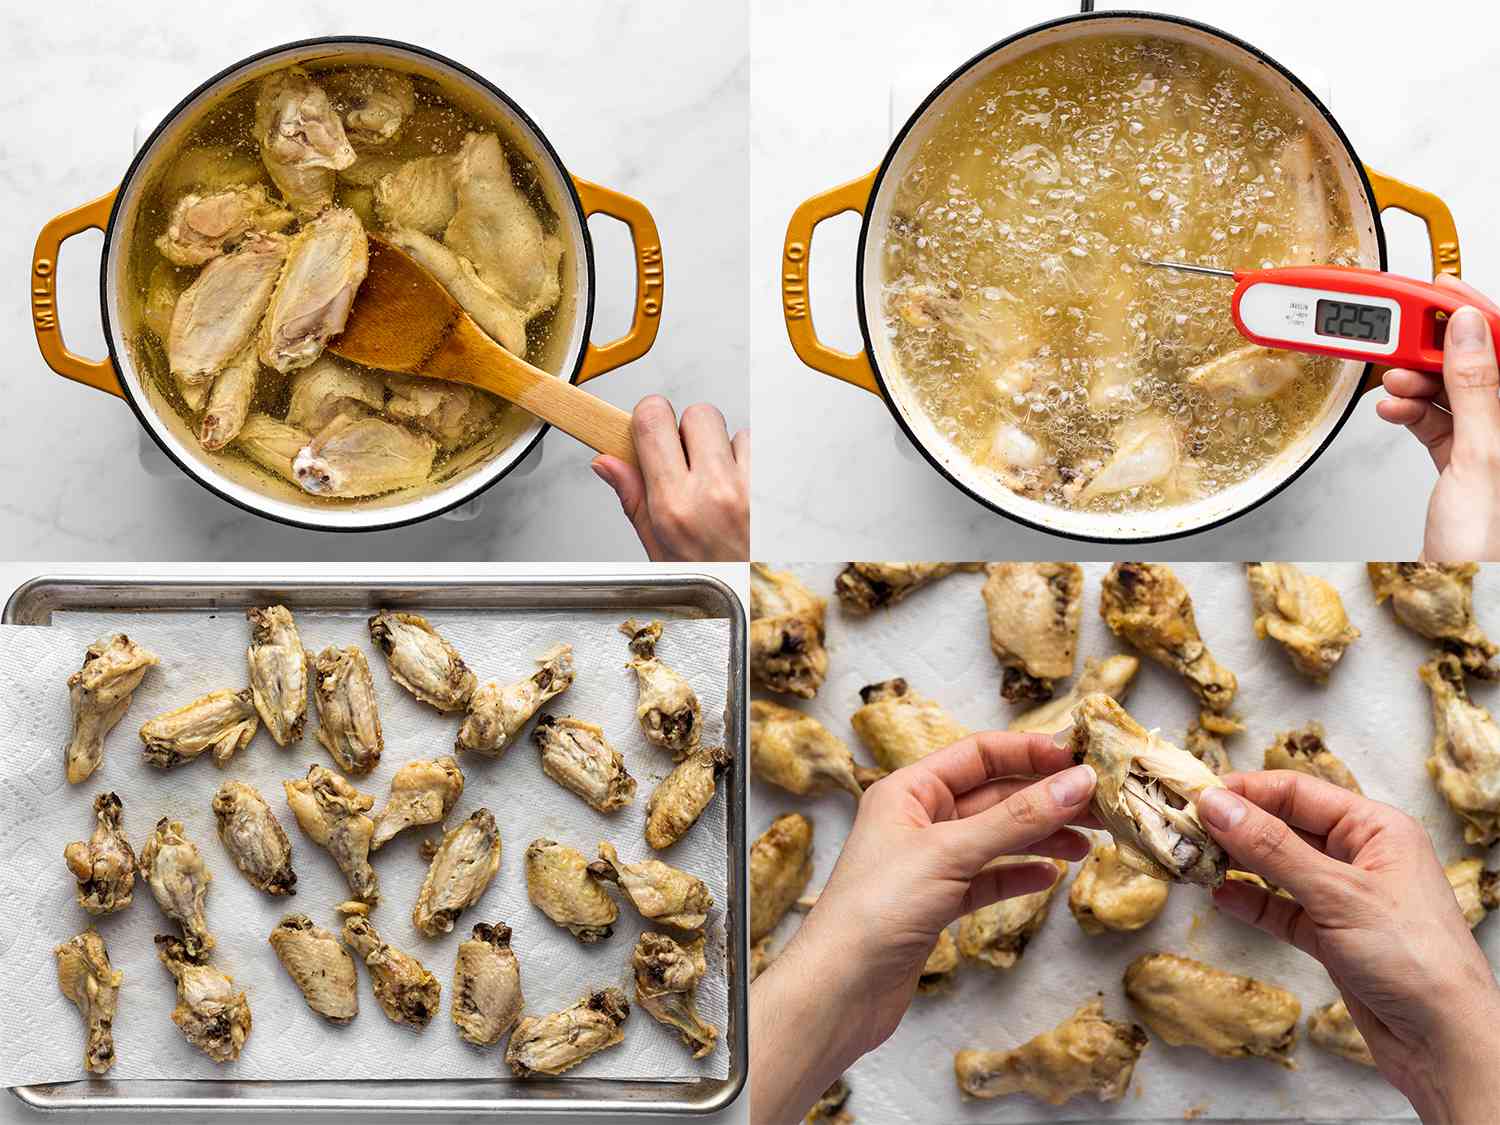 A horizontal four-image collage. The top left photo shows the chicken wings submerged in oil, with small bubbles on the periphery of the pan showing they're gently cooking. The wings are being stirred with a wooden spatula. The top right photo shows the chicken wings in a rapidly boiling dutch oven full of oil, with a handheld thermometer showing the temperature of the oil is 225 degrees Fahrenheit. The bottom left photo shows the cooked chicken wings laid out on a paper towels set inside of a sheet pan. The bottom right photo shows two hands pulling apart a chicken wing, indicating that it's been correctly cooked and is quite tender.